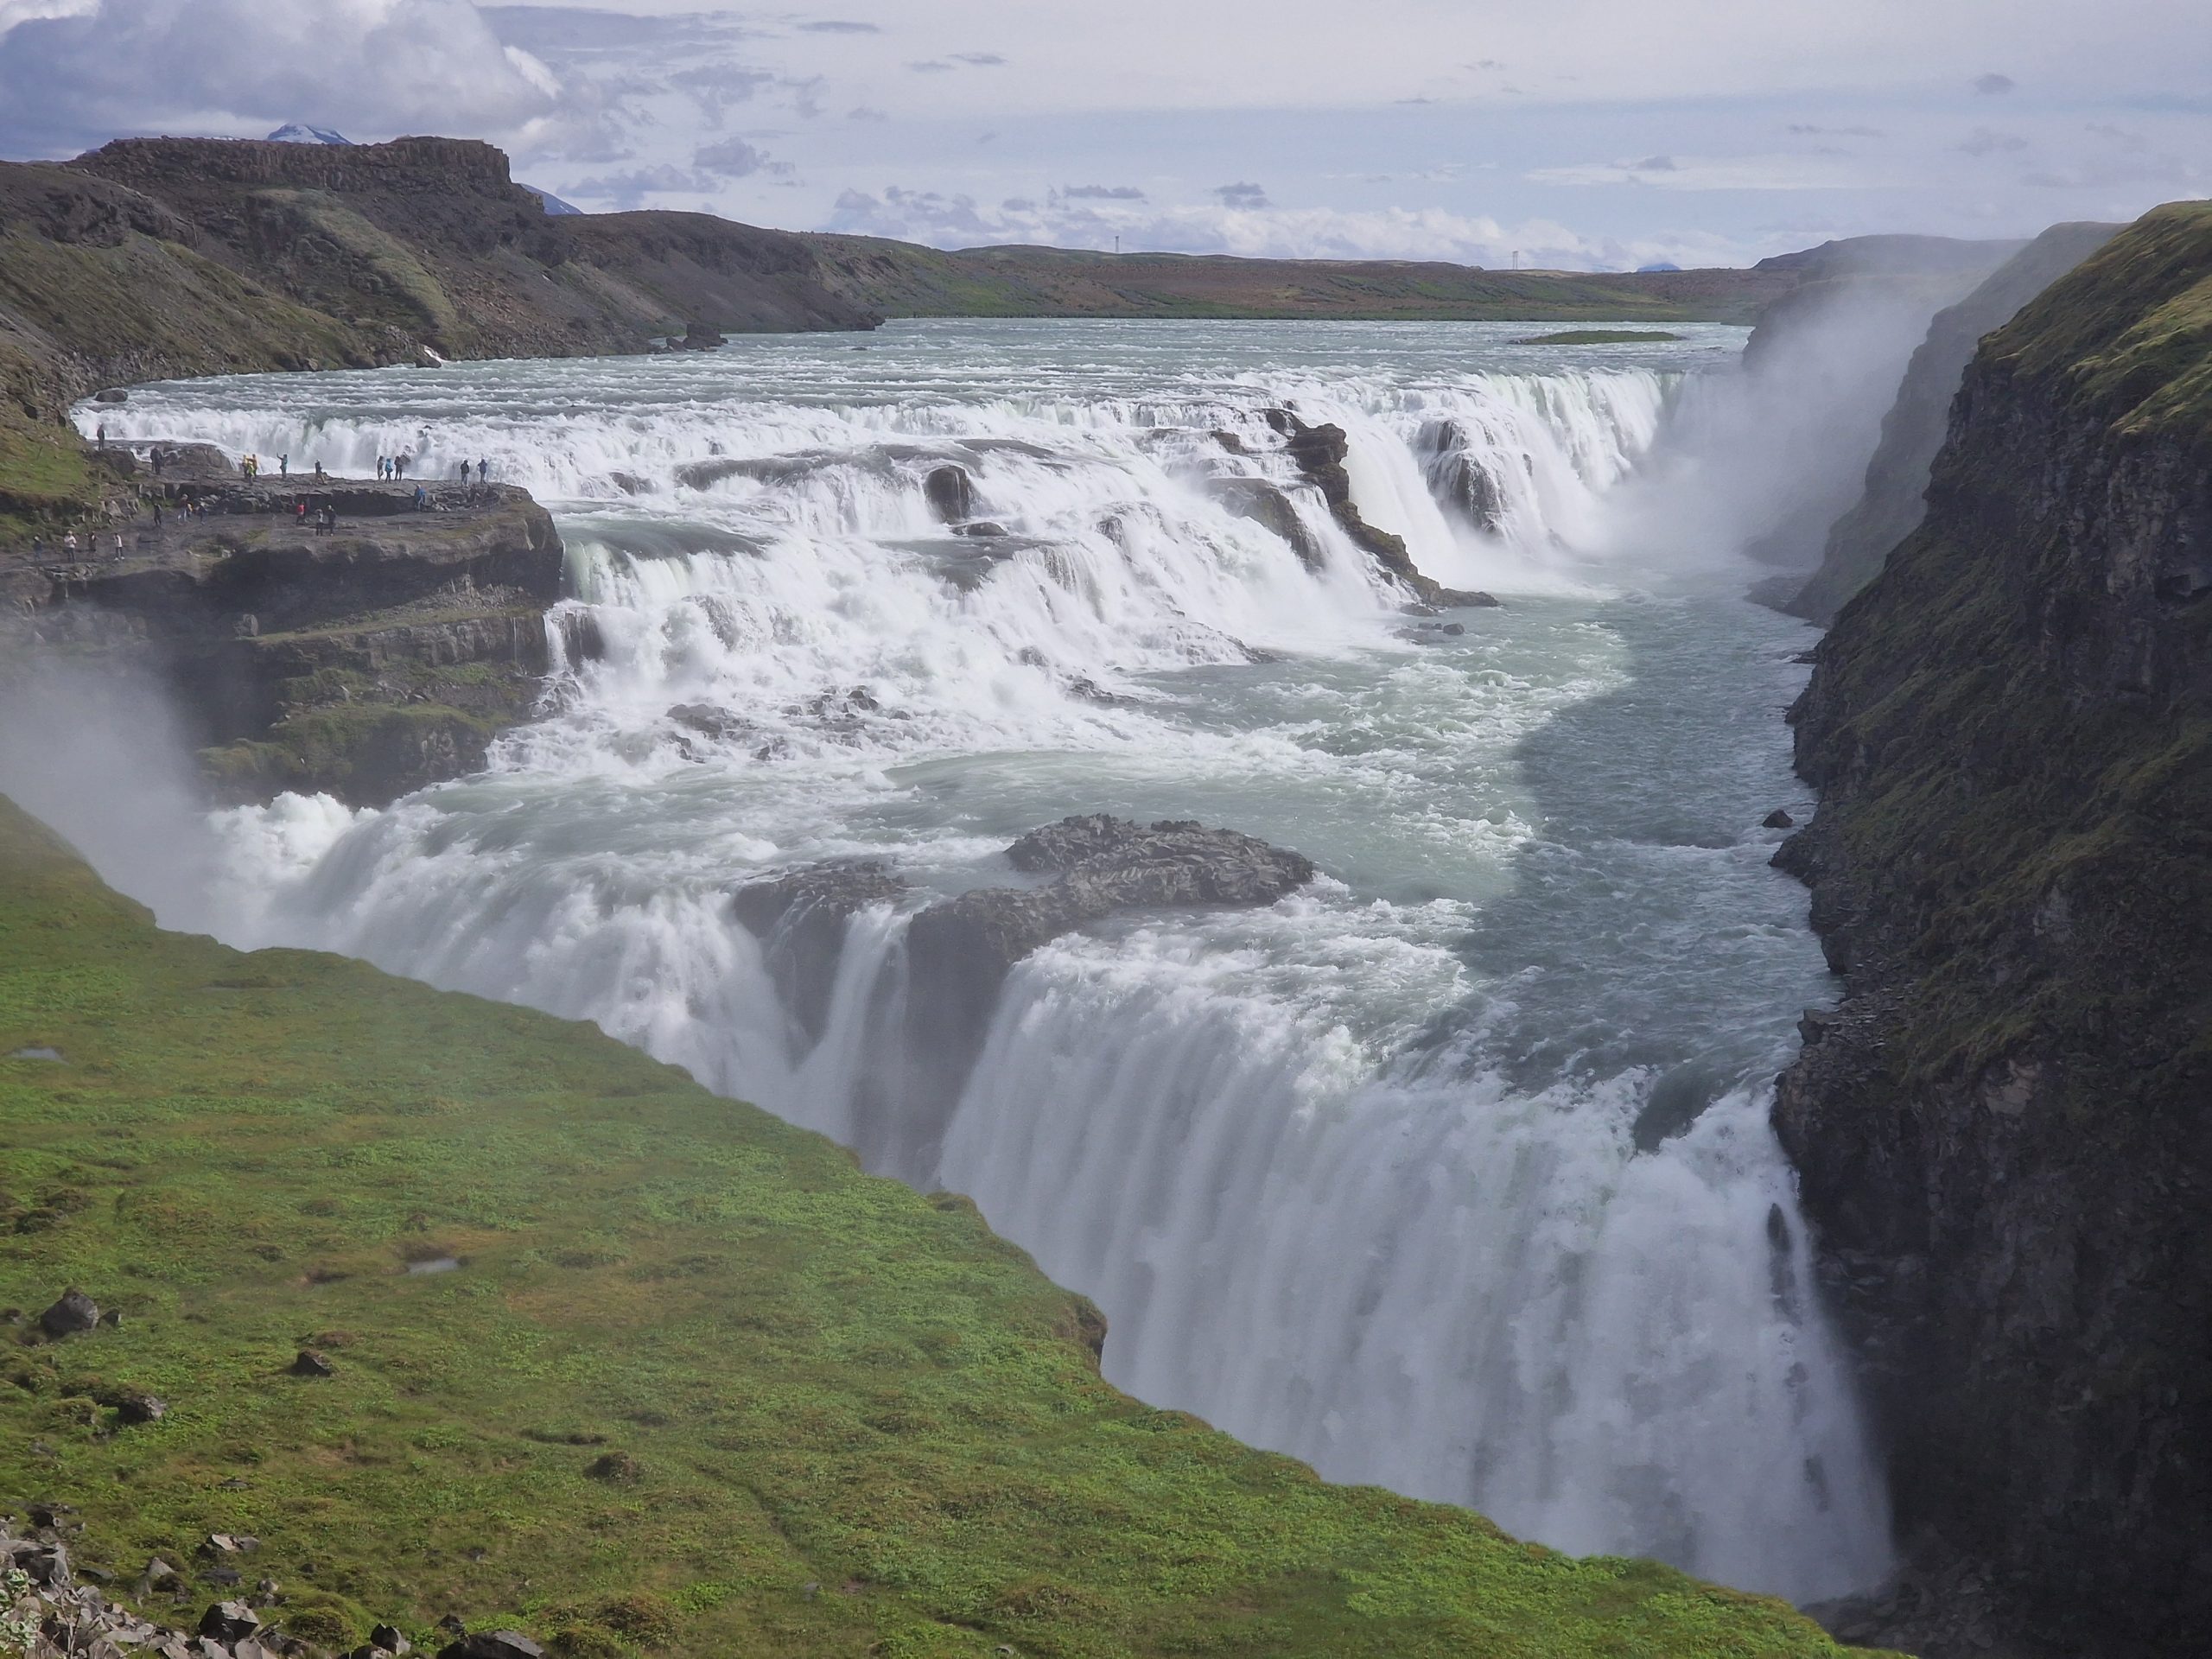 Supported bicycle tours to see Gullfoss waterfall, Geysir geothermal area and Thingvellir national park.